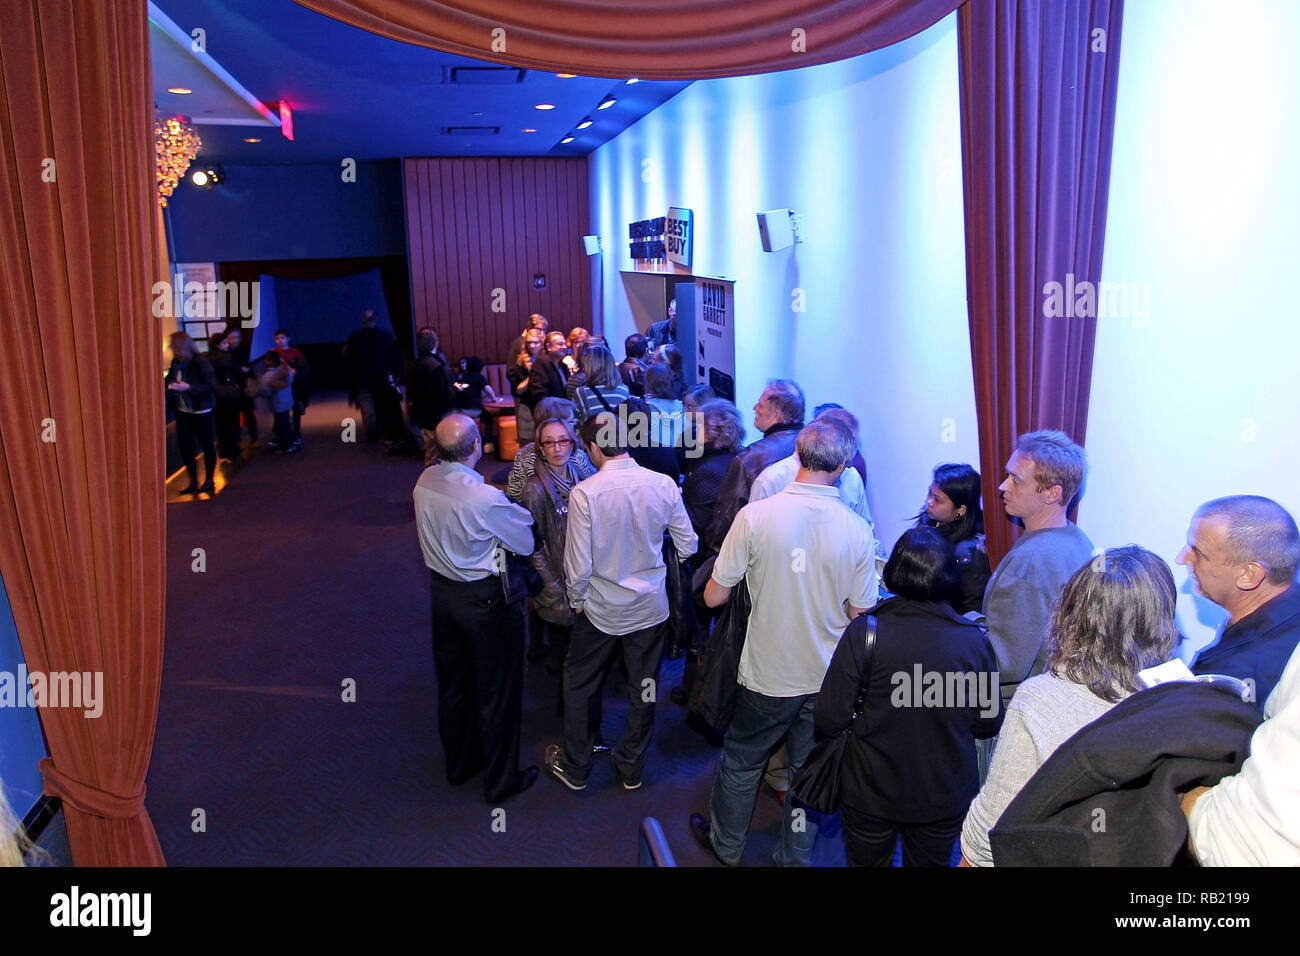 New York, USA. 18 Feb, 2011. Atmosphere at the David Garrett Concert Presented by Marantz at Best Buy Theater in New York, USA. Credit: Steve Mack/S.D. Mack Pictures/Alamy Stock Photo